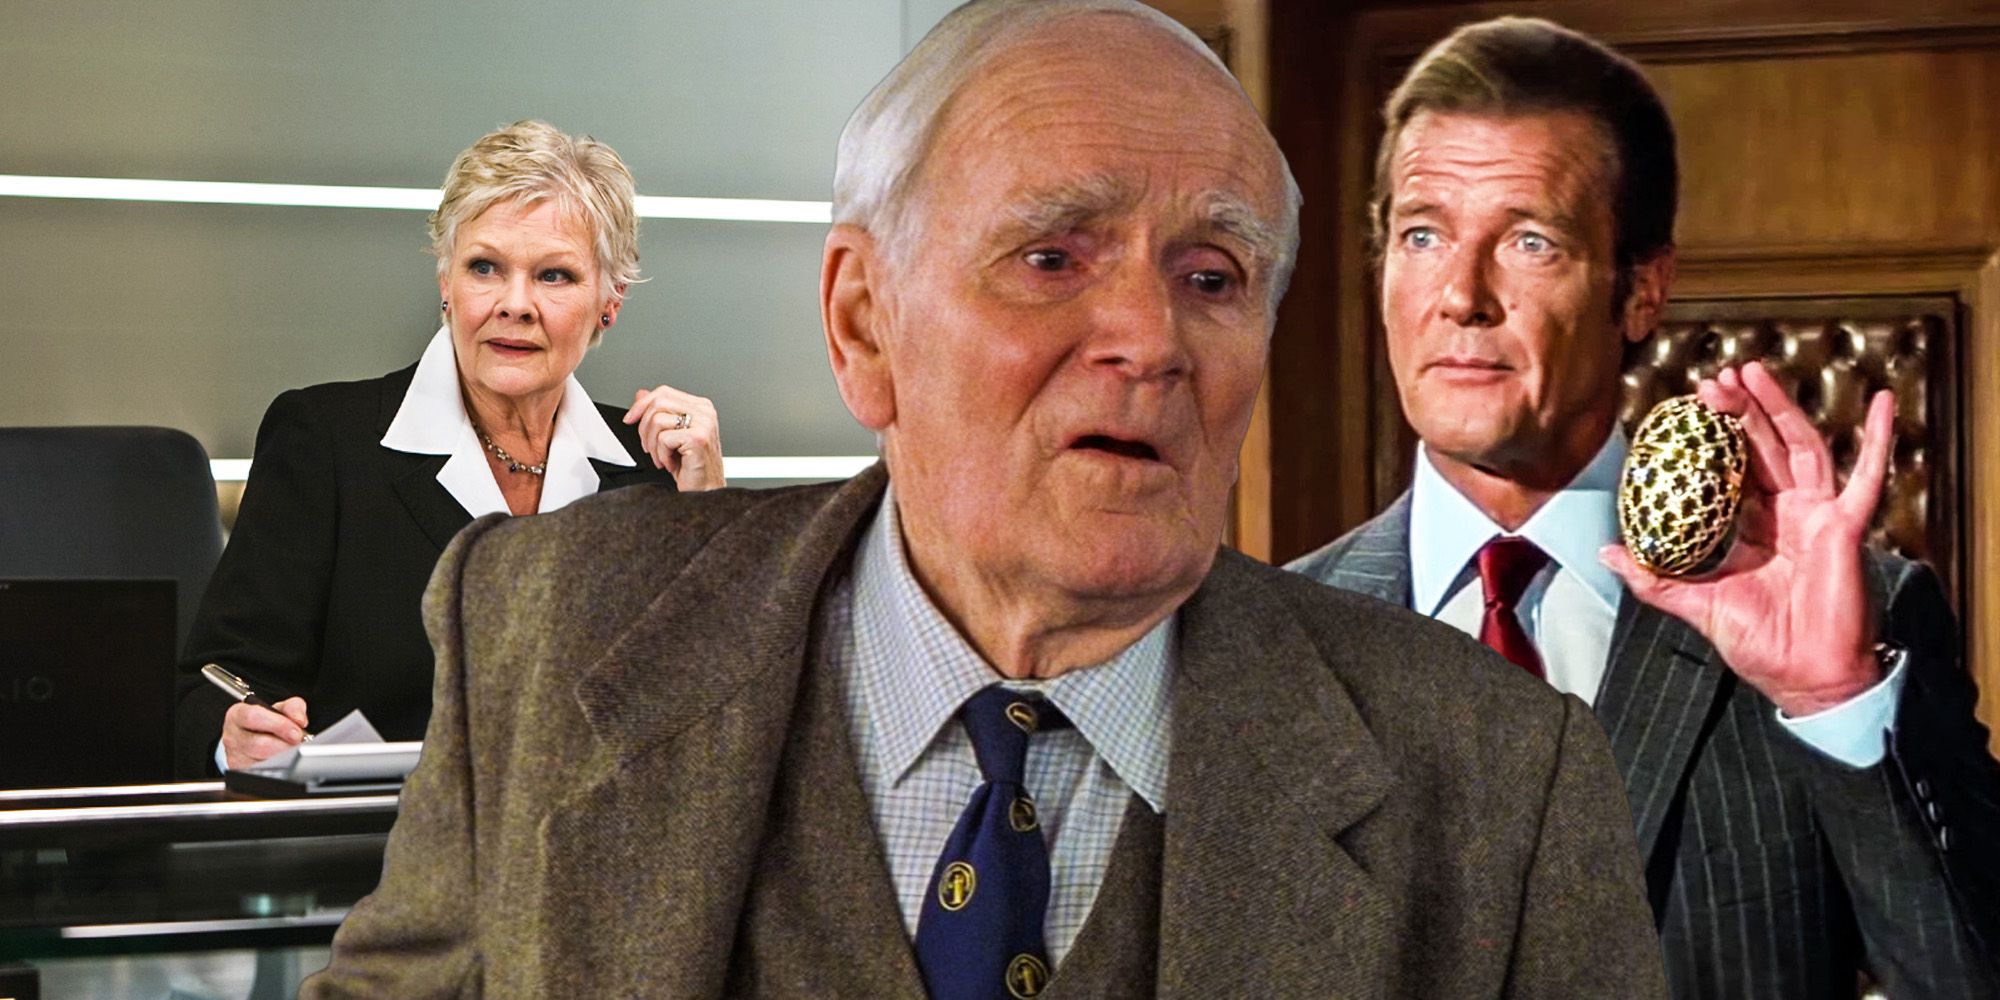 Actor who Has Appeared In The Most 007 Movies Desmond Llewelyn Q Judi Dench roger moore